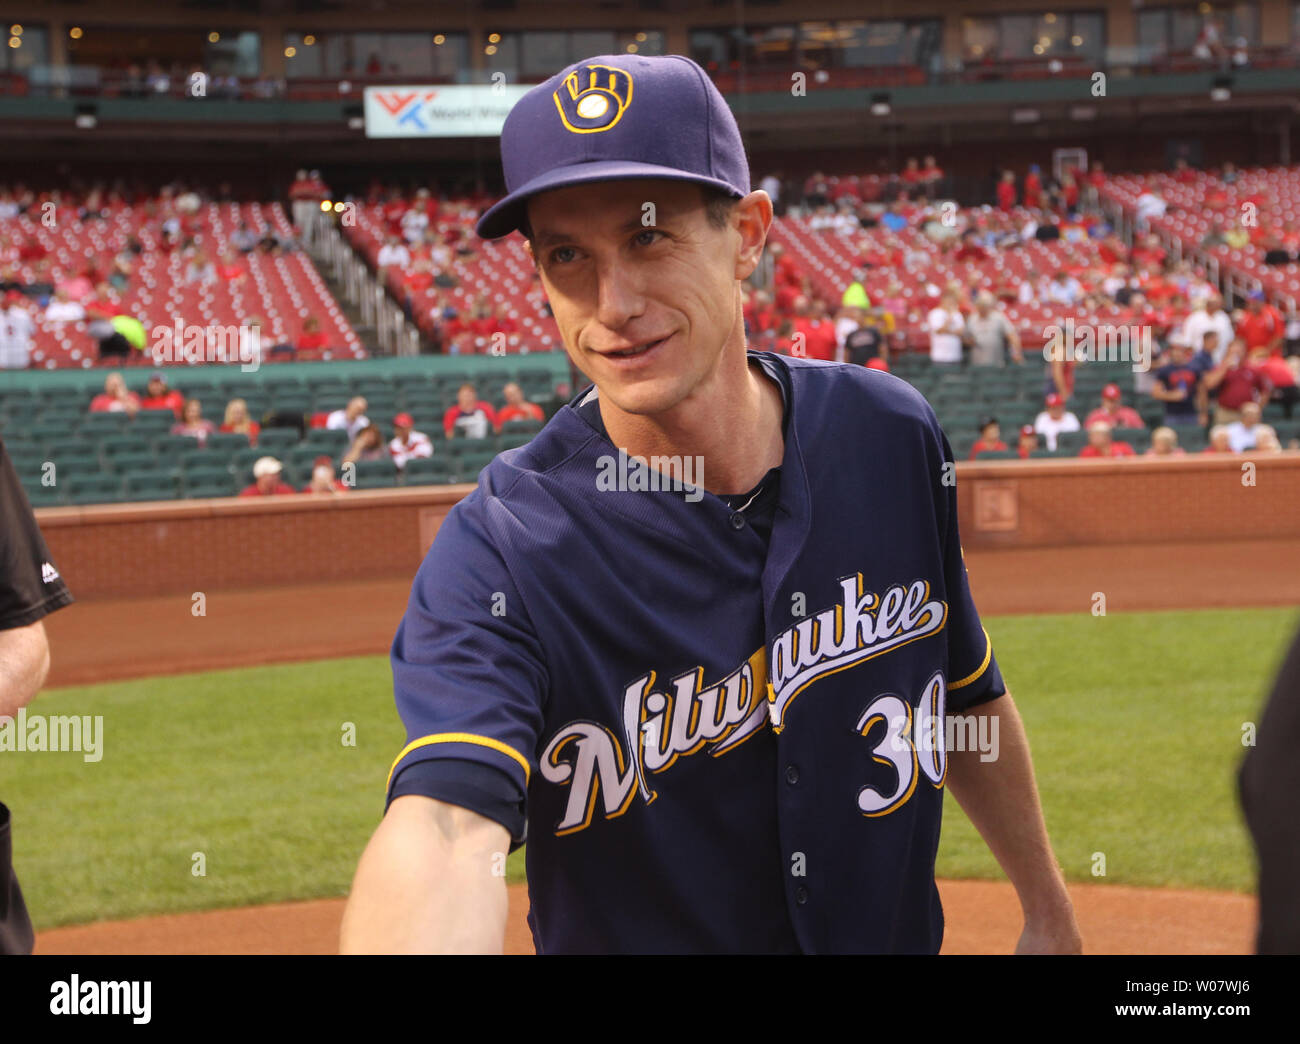 MILWAUKEE, WI - JUNE 22: Infielder Craig Counsell #30 of the